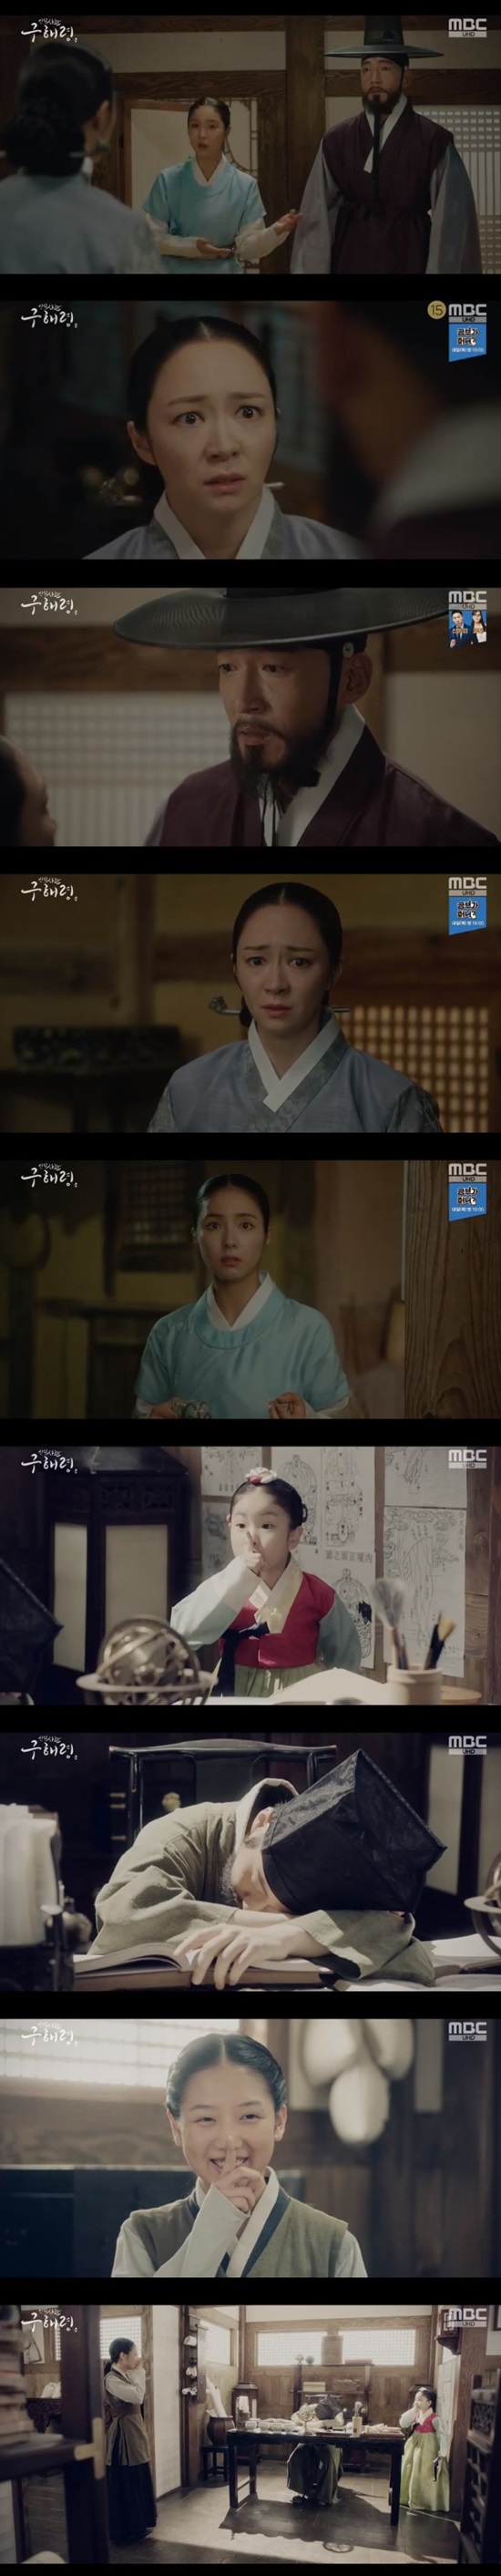 Shin Se-kyung birth secrets have been hinted at following Cha Eun-woo birth secrets.In the MBC drama Rookie Historian Goo Hae-ryung, which was broadcast on August 28 (played by Kim Ho-soo/directed by Kang Il-soo Han Hyun-hee), Mohwa (played by Jeon Ik-ryeong) was shown by Koo Jae-kyung (played by Kong Hwan-hwan) and Rookie Historian Goo Hae-ryung (played by Shin Se-kyung) with siblings Meet Rookie Historian Goo Hae-ryungs birth secret revealedOn the day of the broadcast, Jang (Fabian), a law book (France), was trapped in the money department and escaped, causing a major disturbance.The Taoyuan Daegun Yirim (Cha Eun-woo) and Rookie Historian Goo Hae-ryung were saddened by the chased chapters, and began to make friendships by hiding them in the melted sugar and giving them food.Chang asked Lee, Do you know where the dawn is coming? He added questions about Identity by asking about Seoraewon.Seoraewon was also a place where Gu Jae-kyung and Mohwa learned Western medicine together.Currently, Koo Jae-kyung lives as a person of Min Ik-pyeong (Choi Deok-moon), but Mohwa is being pursued by Min Ik-pyeong and is working for Dae-han Lim (Kim Yeo-jin).Mohwa met the chapter and was late and found a place to be chased by the pojols. He encountered Rookie Historian Goo Hae-ryung in front of the house of Koo Jae-kyung.Rookie Historian Goo Hae-ryung invited Mohwa to his home only as a daughter, and introduced Koo Jae-kyung as my brother.Koo Jae-kyung greeted Rookie Historian Goo Hae-ryung after pretending to meet for the first time with Mohwa.Mohwa asked Koo Jae-kyung, When did you have a sister? When did you have a sister? When did you die before you were born, and only a sick mother was a family member?The mother-of-one is Rookie Historian Goo Hae-ryung, who said, In fact, there is a memory that was just sick when I was a child.I think its a pharynx, and my father told me that hed be better if he was sick, and Im twenty-six years old, so Im about twenty-six years old.Soon Mohwa noticed the Identity of Rookie Historian Goo Hae-ryung and told Koo Jae-kyung, That child is not your brother. What are you thinking?Why are you? How are you? said Koo, who begged, Play not knowing, theres still work to be done, please, until then.Mohwa once shut up, and recalled Rookie Historian Goo Hae-ryung, who had been with Seoraewon teacher in the past.Yoo Gyeong-sang